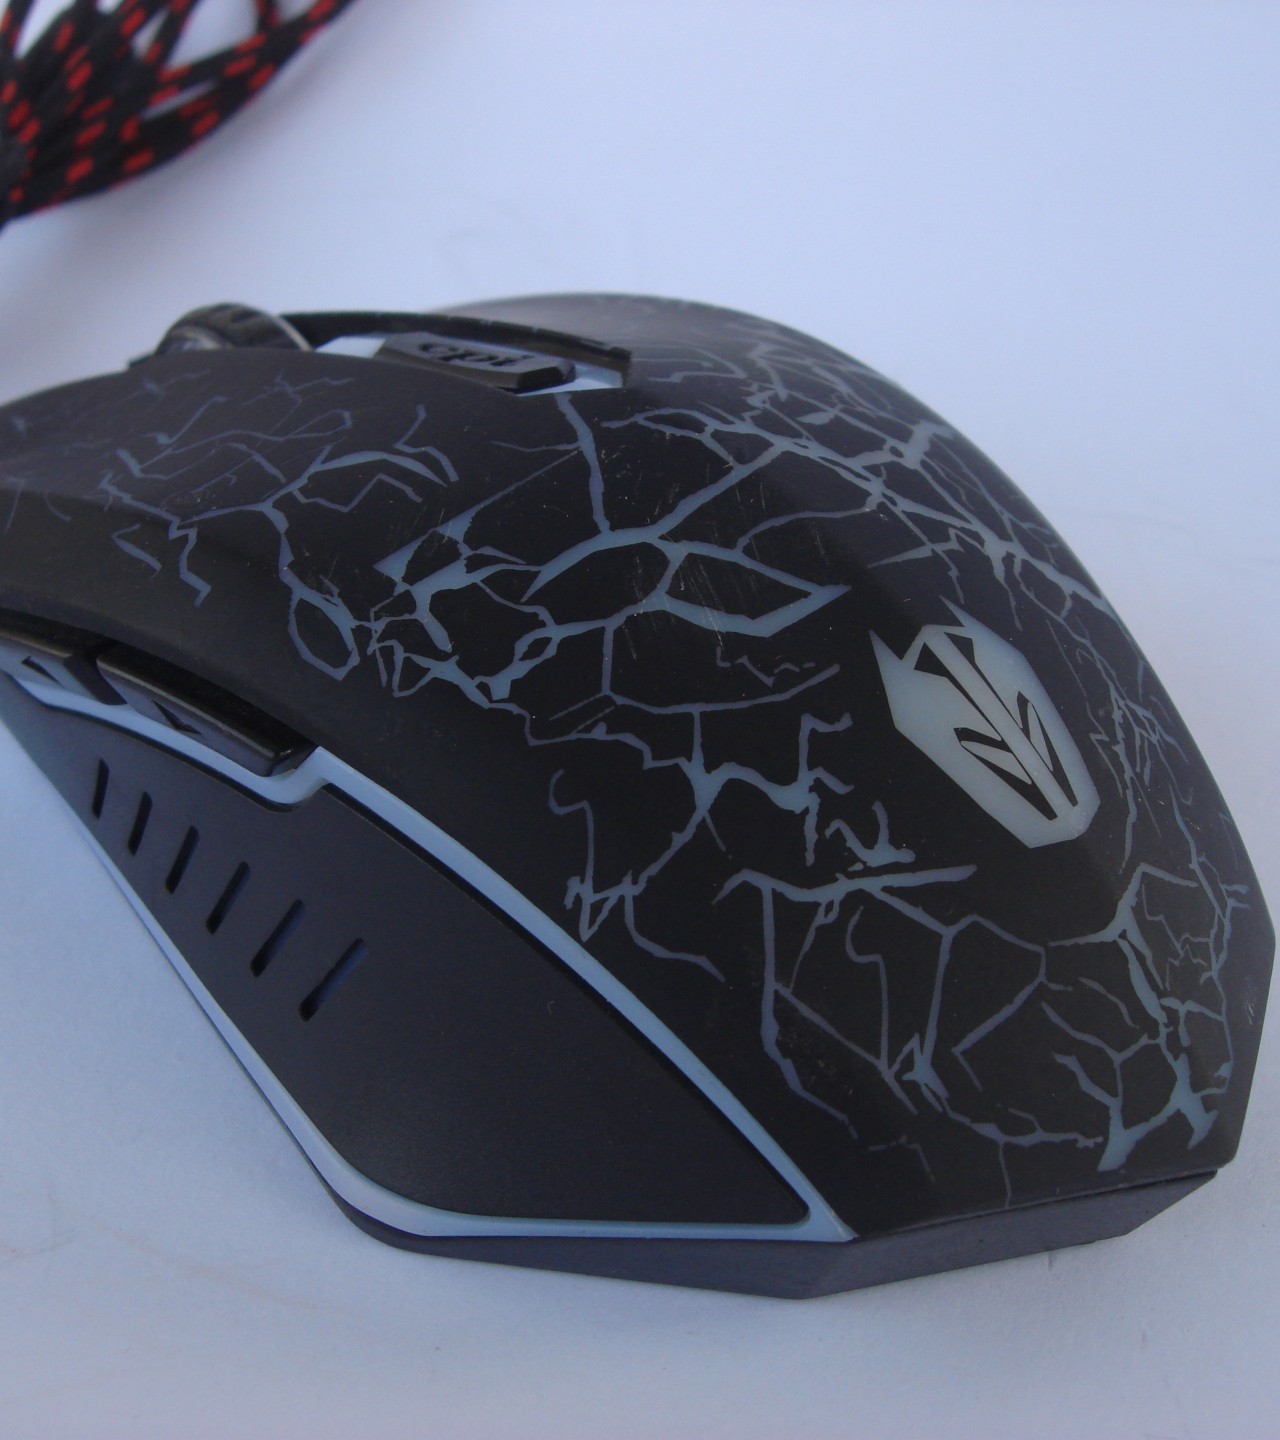 Professional Gaming Mouse with changing lights